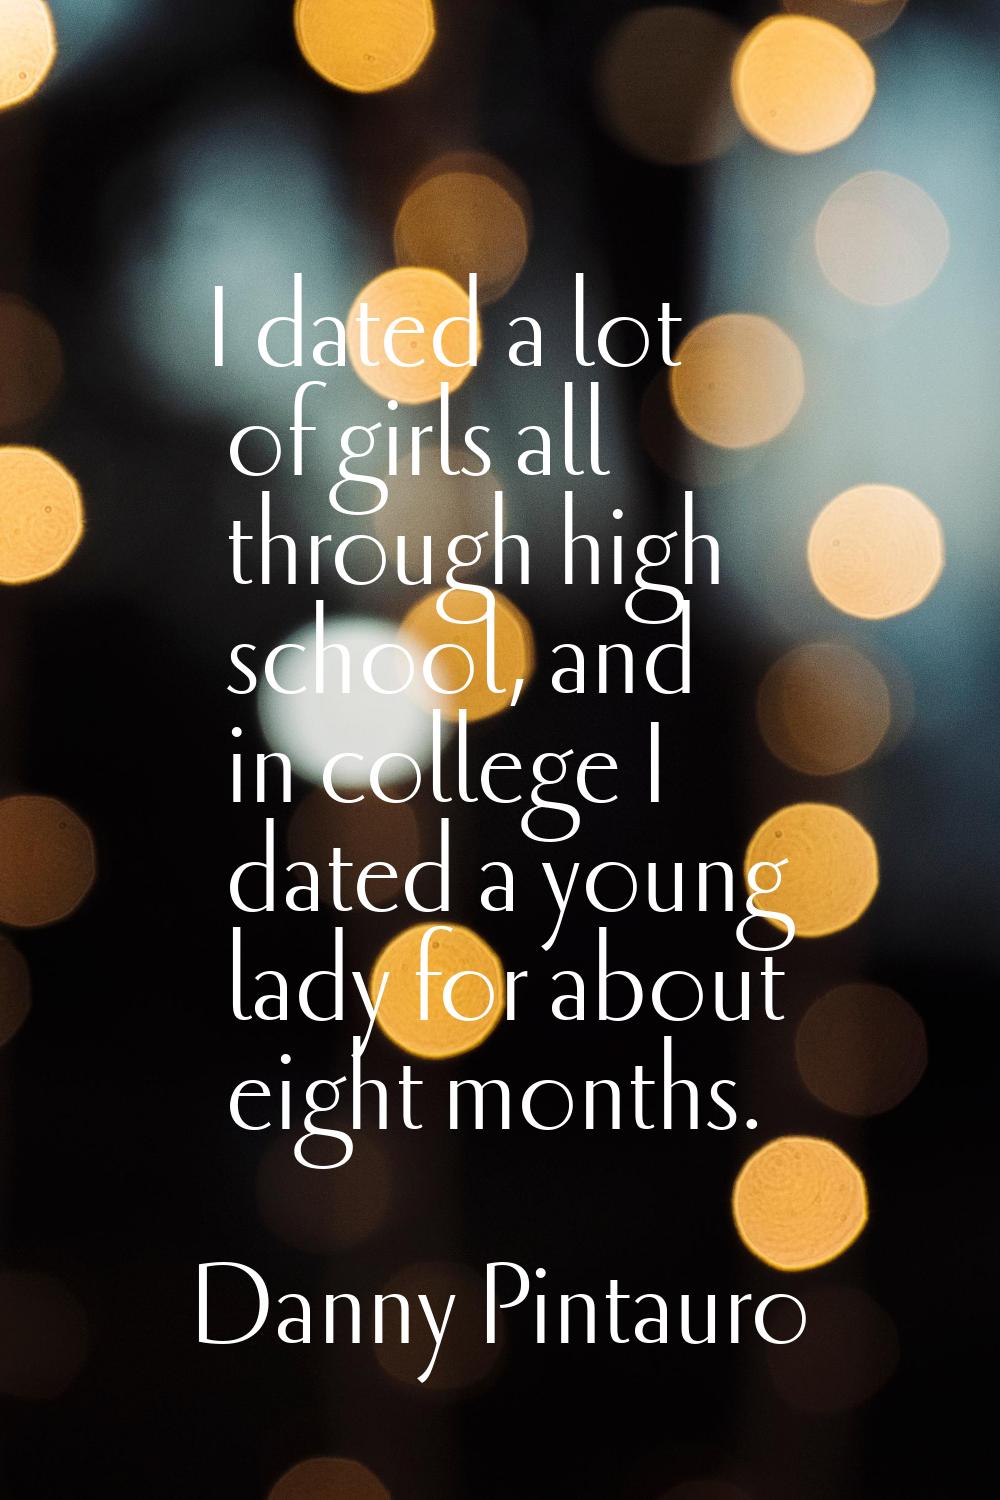 I dated a lot of girls all through high school, and in college I dated a young lady for about eight